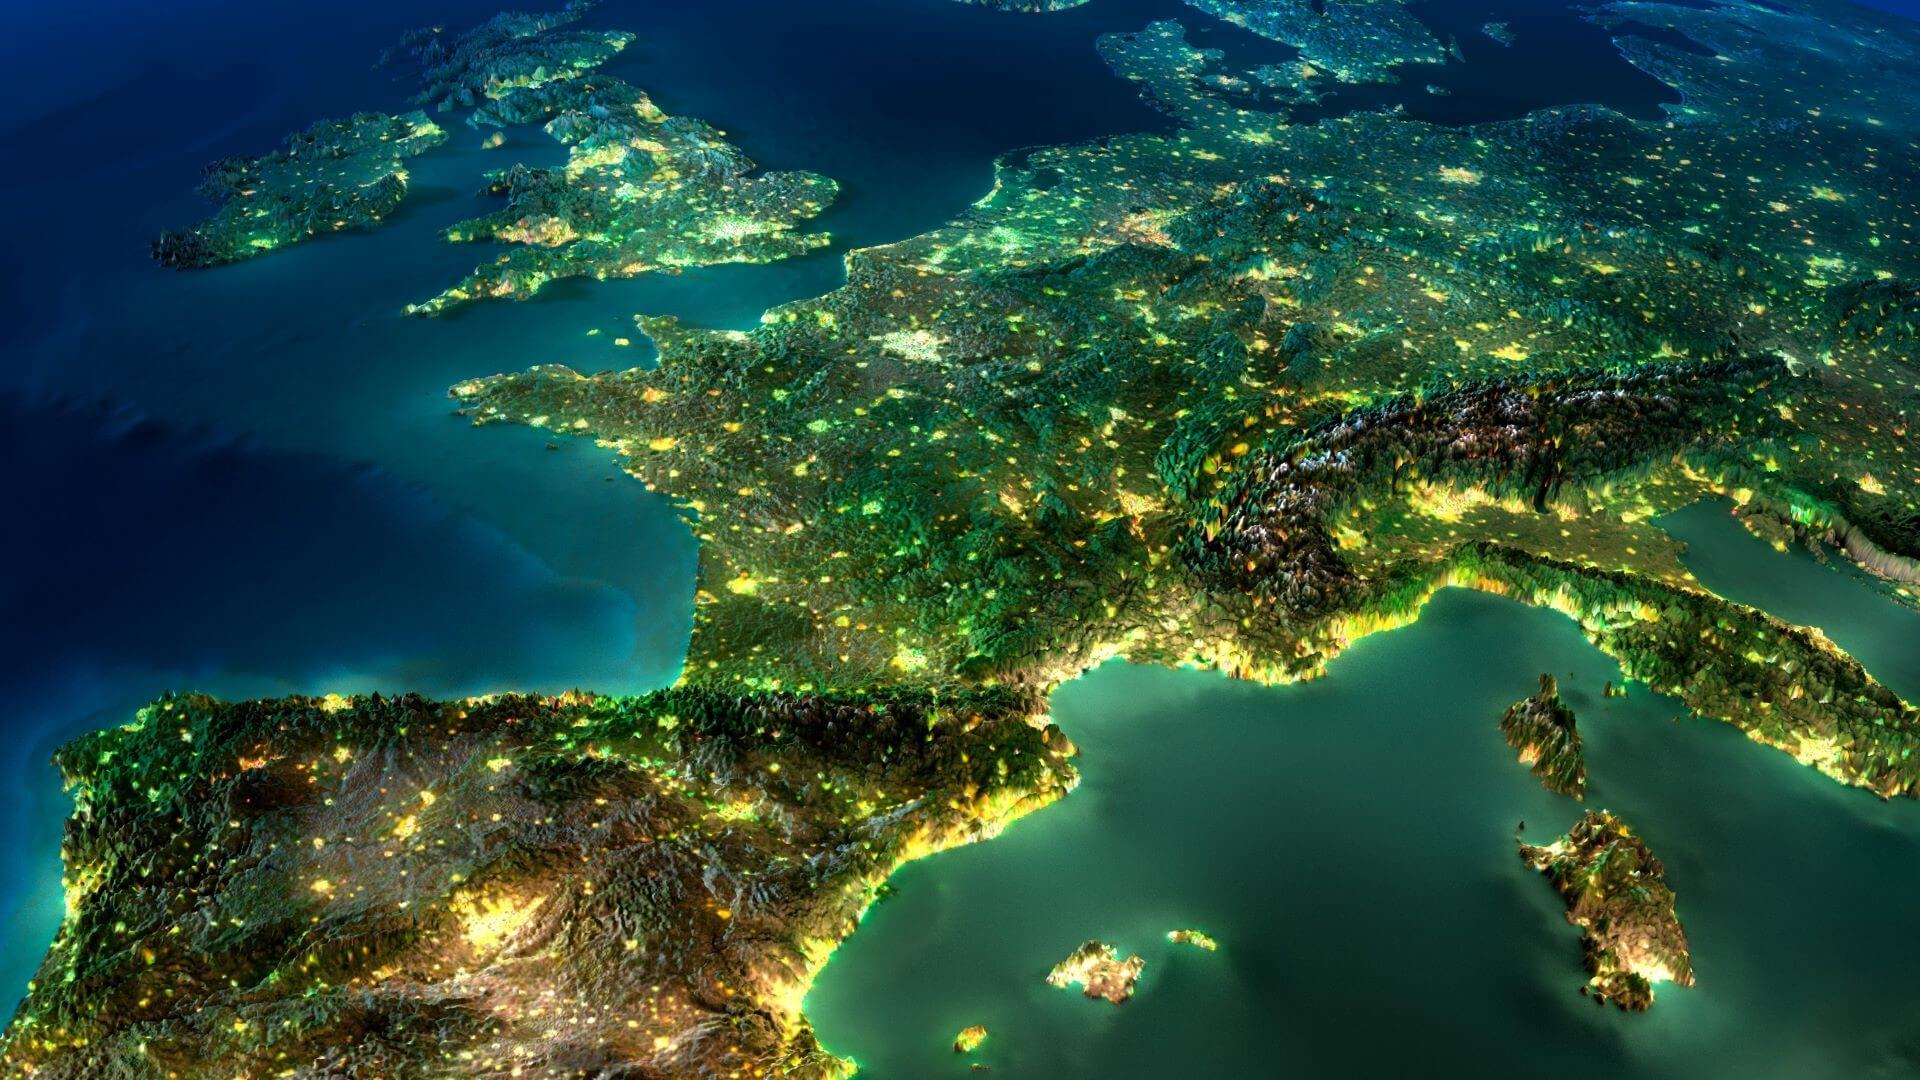 View of Europe from space, showing large cities lit up at night